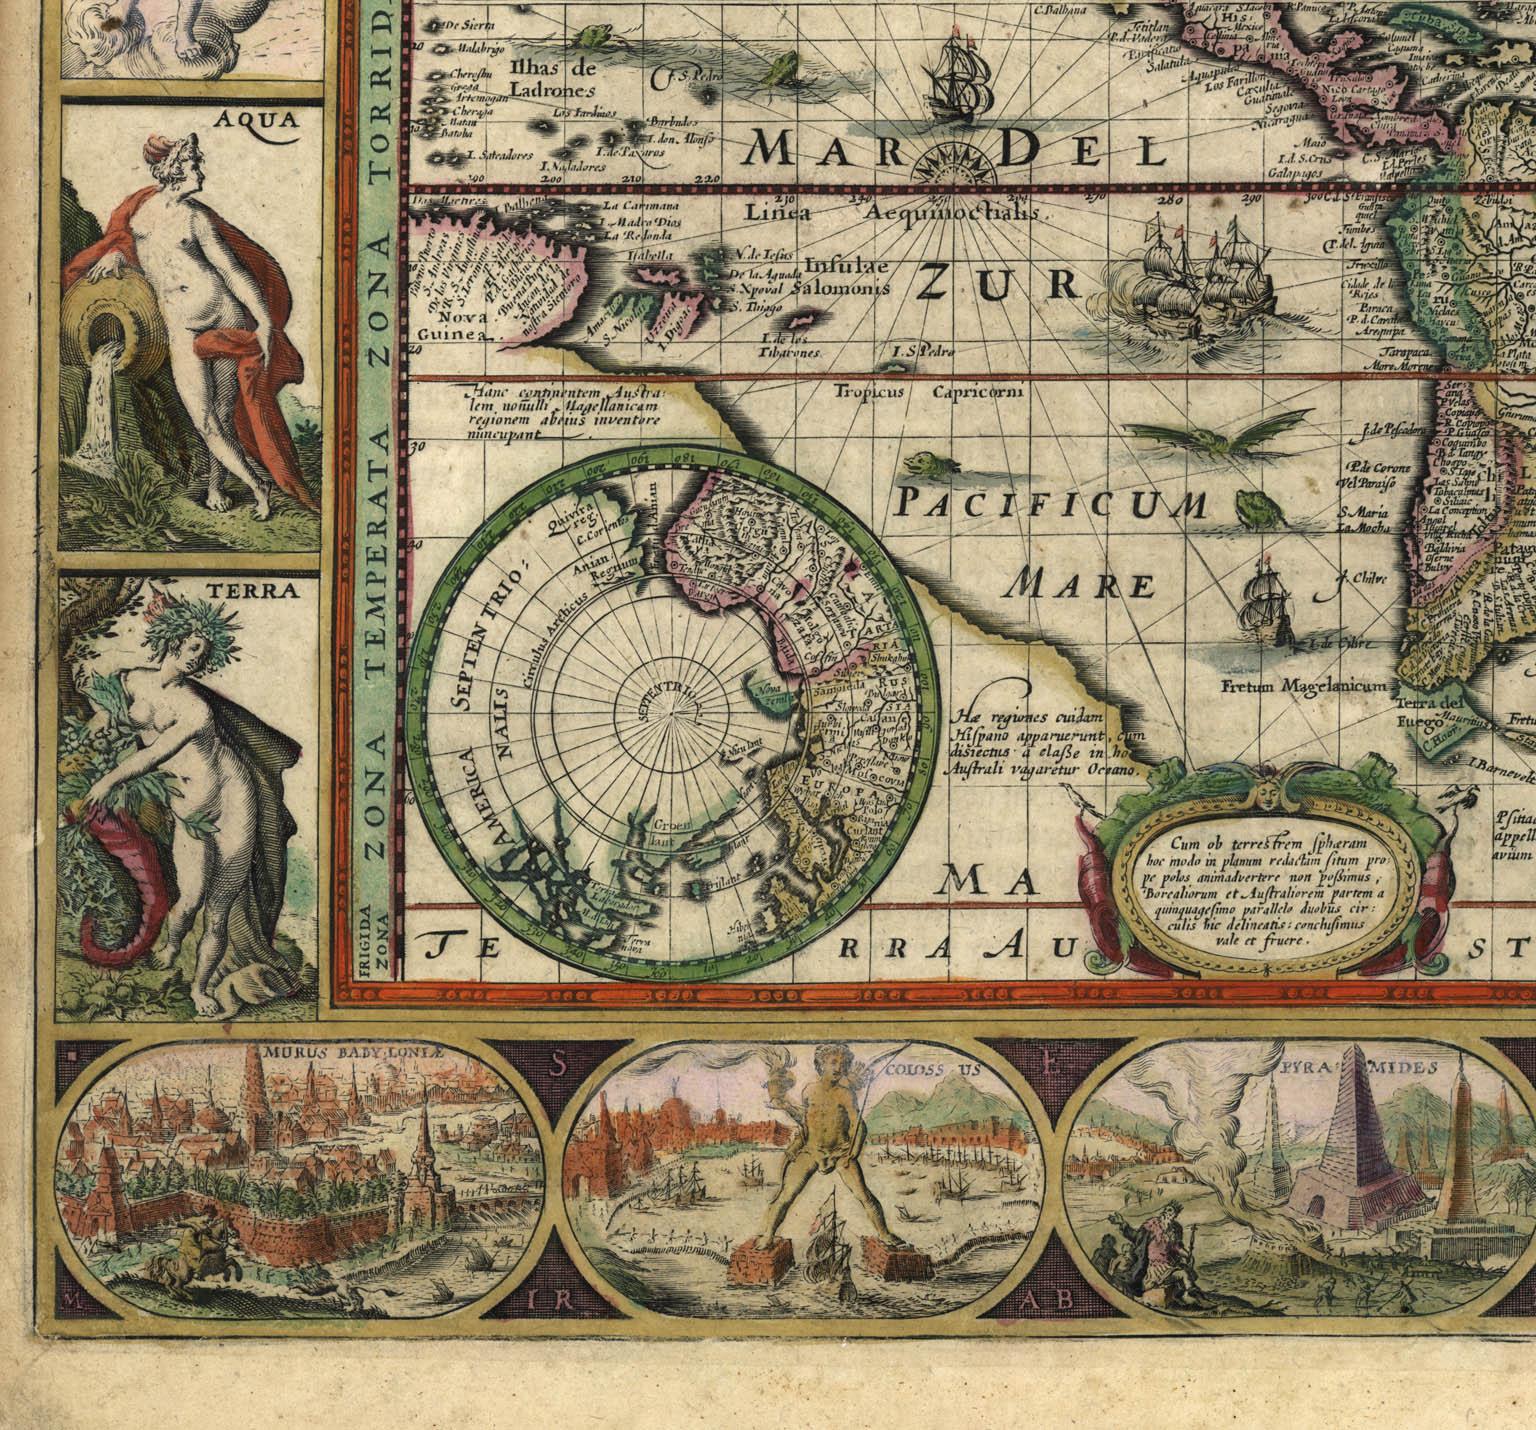 Copper-plate engraving, hand-colored, 1608 - c.1630 and published by Joannes Jansonius, Amsterdam.  Image size 15.75 x 21.19 inches (40 x 53.9 cm).  

A classic example of a world map based on Mercator's projection. This beautiful carte-a-figures